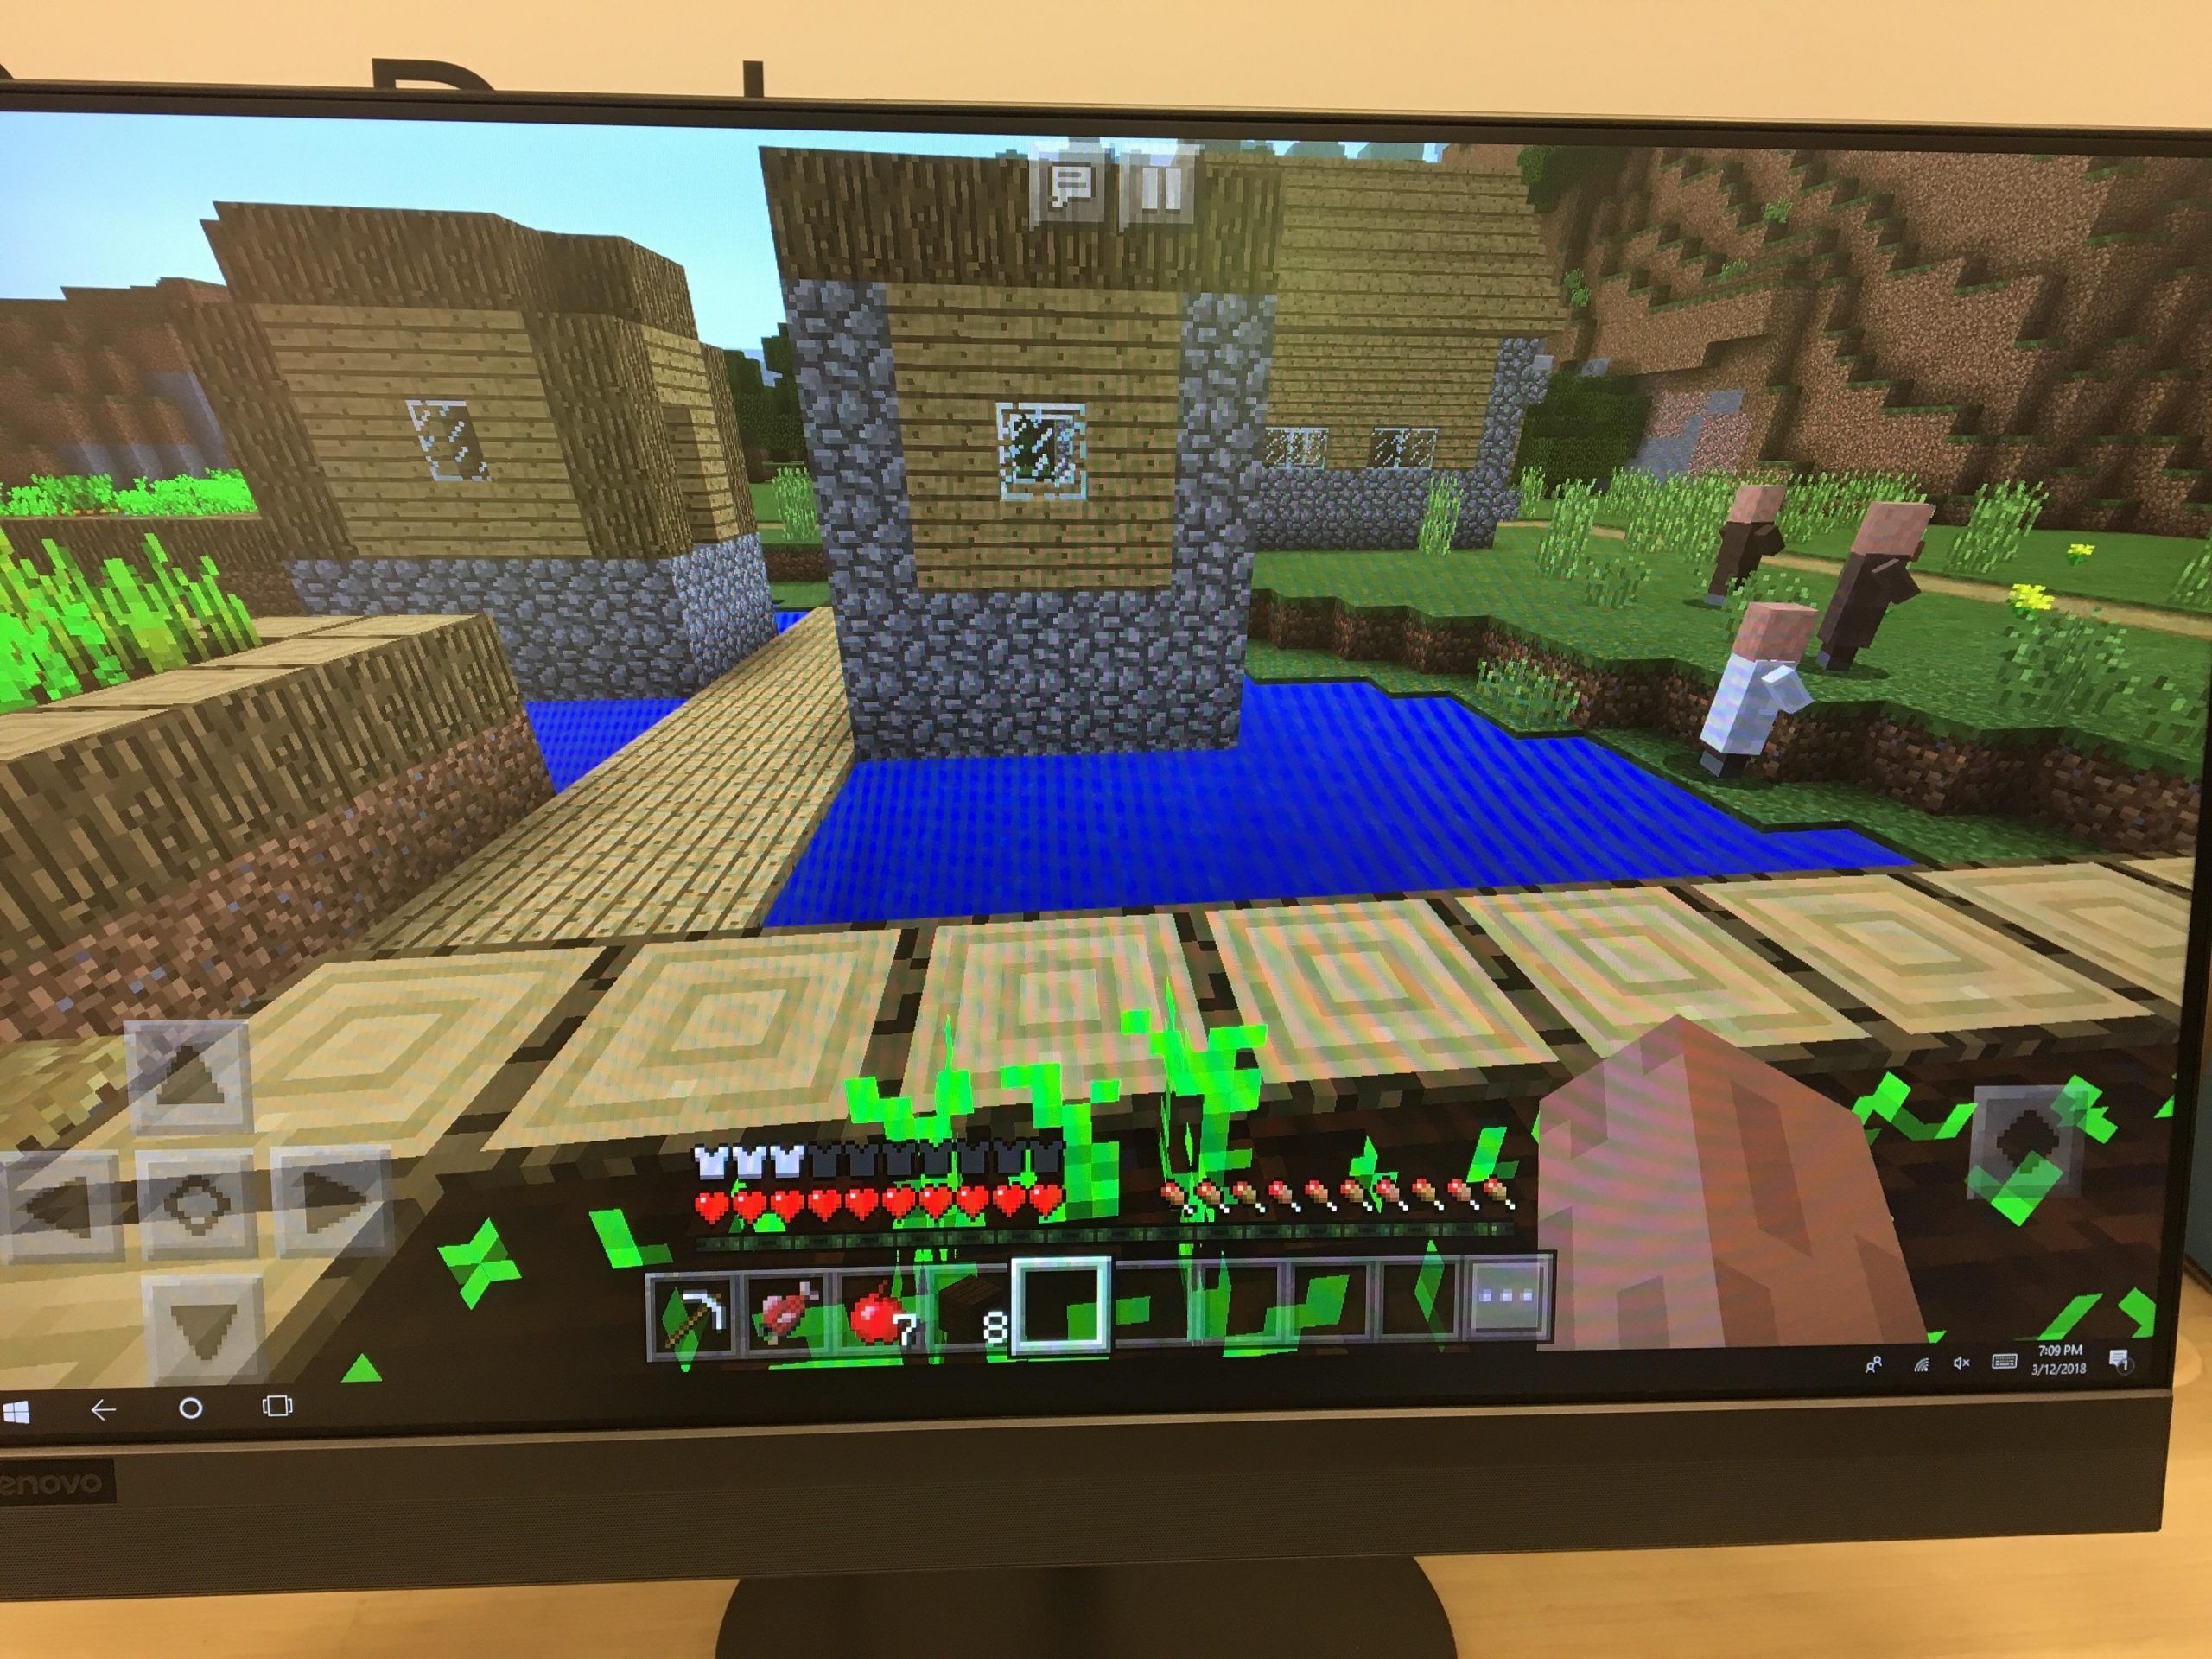 Apparently we can play Minecraft on a demo computer ...